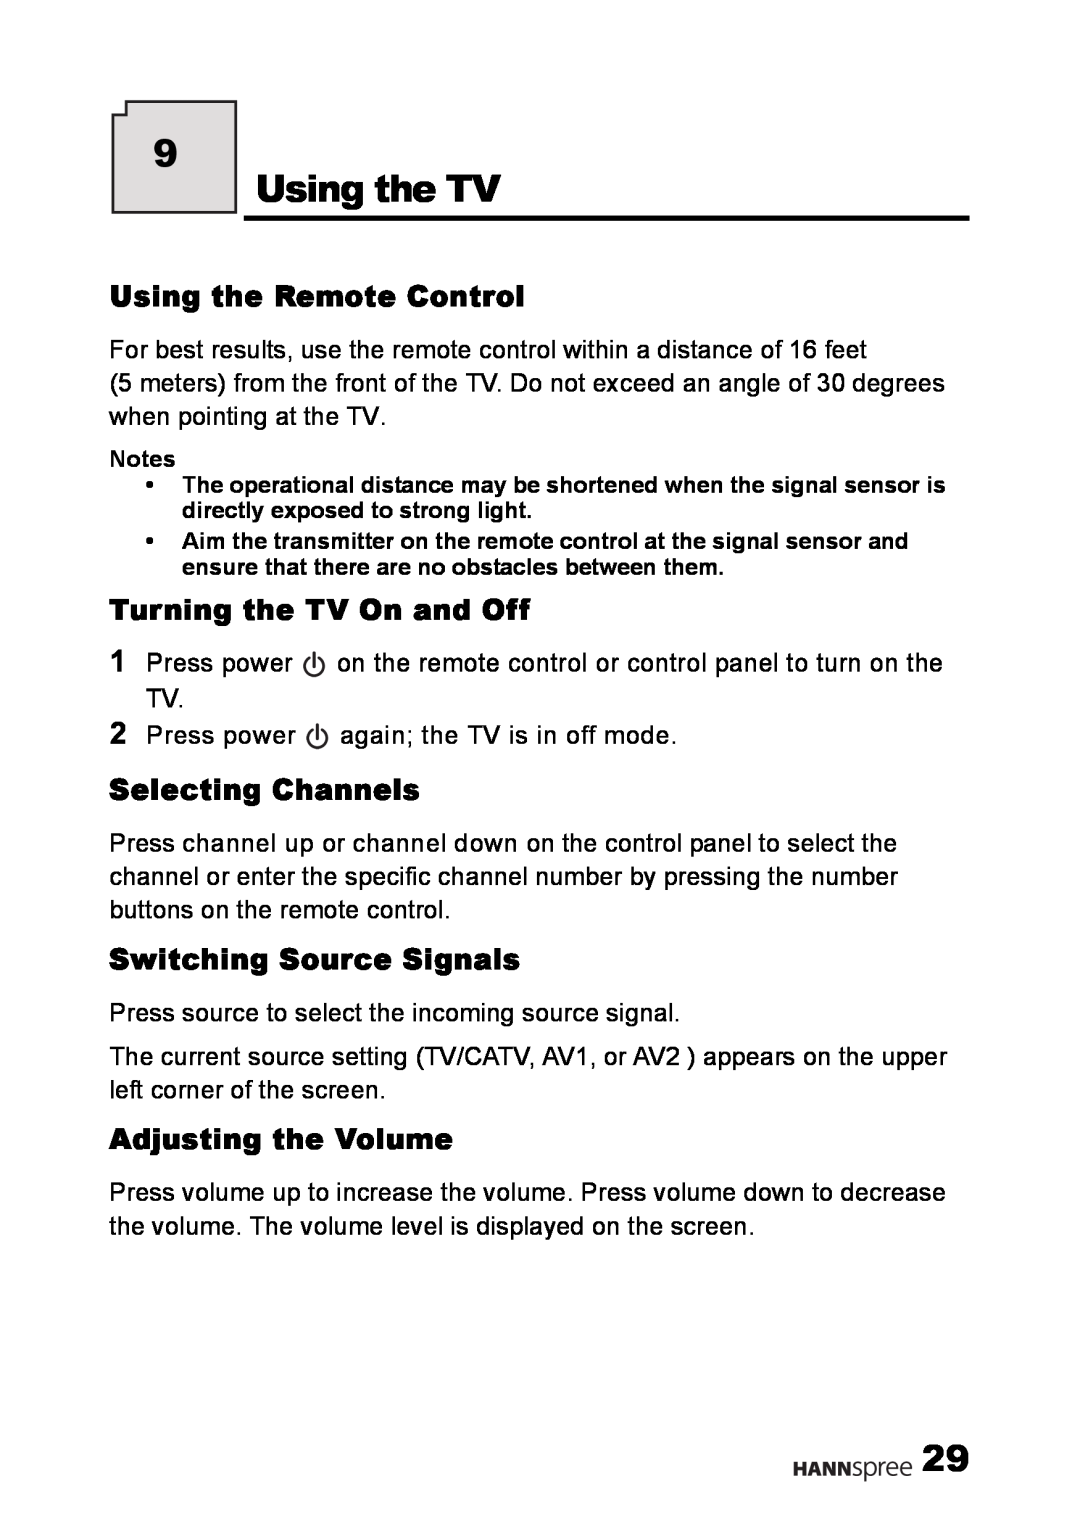 HANNspree LT09-10U1-000 user manual Using the TV, Using the Remote Control, Turning the TV On and Off, Selecting Channels 